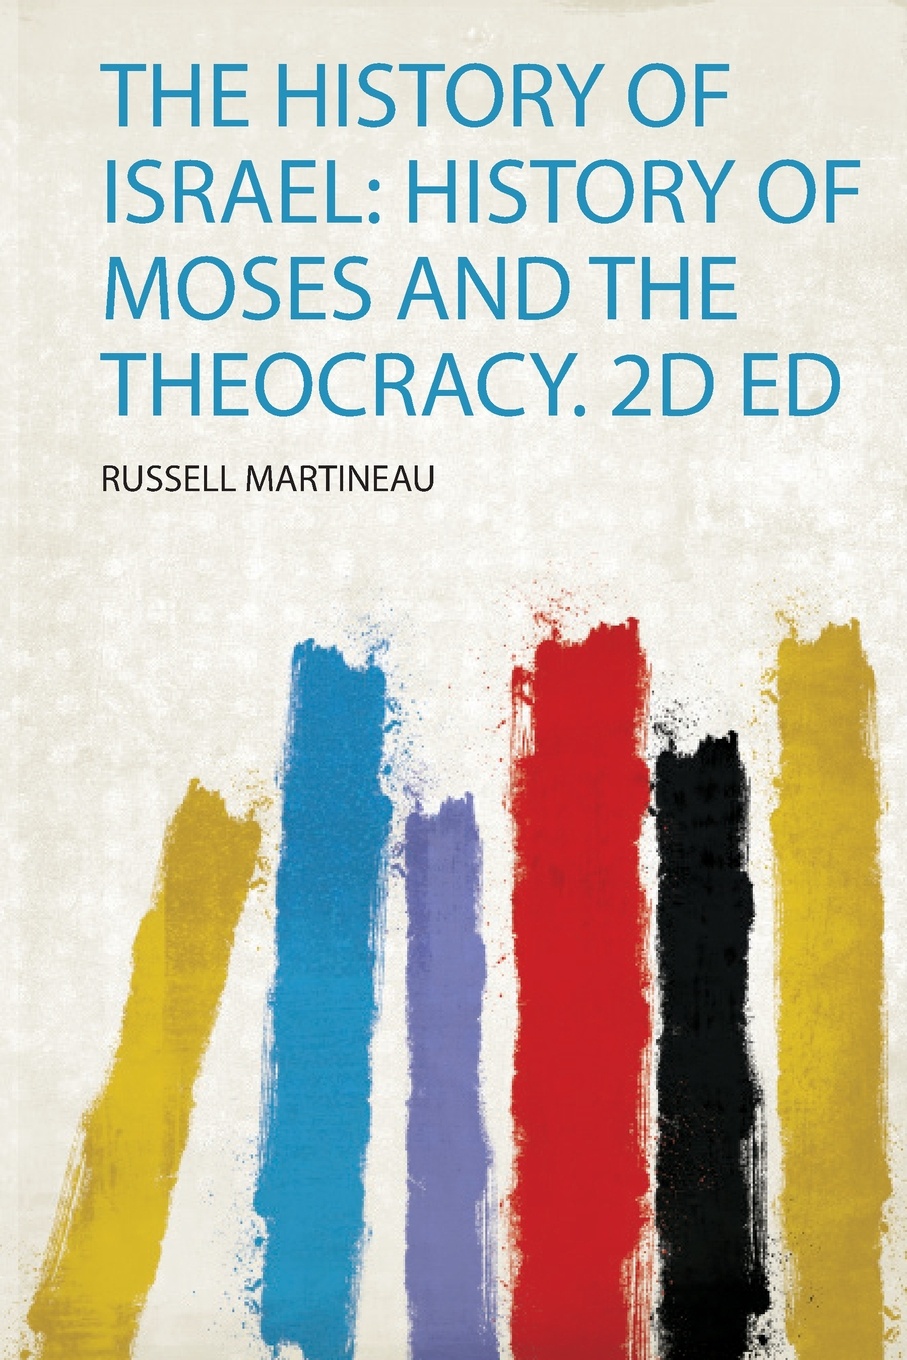 The History of Israel. History of Moses and the Theocracy. 2D Ed